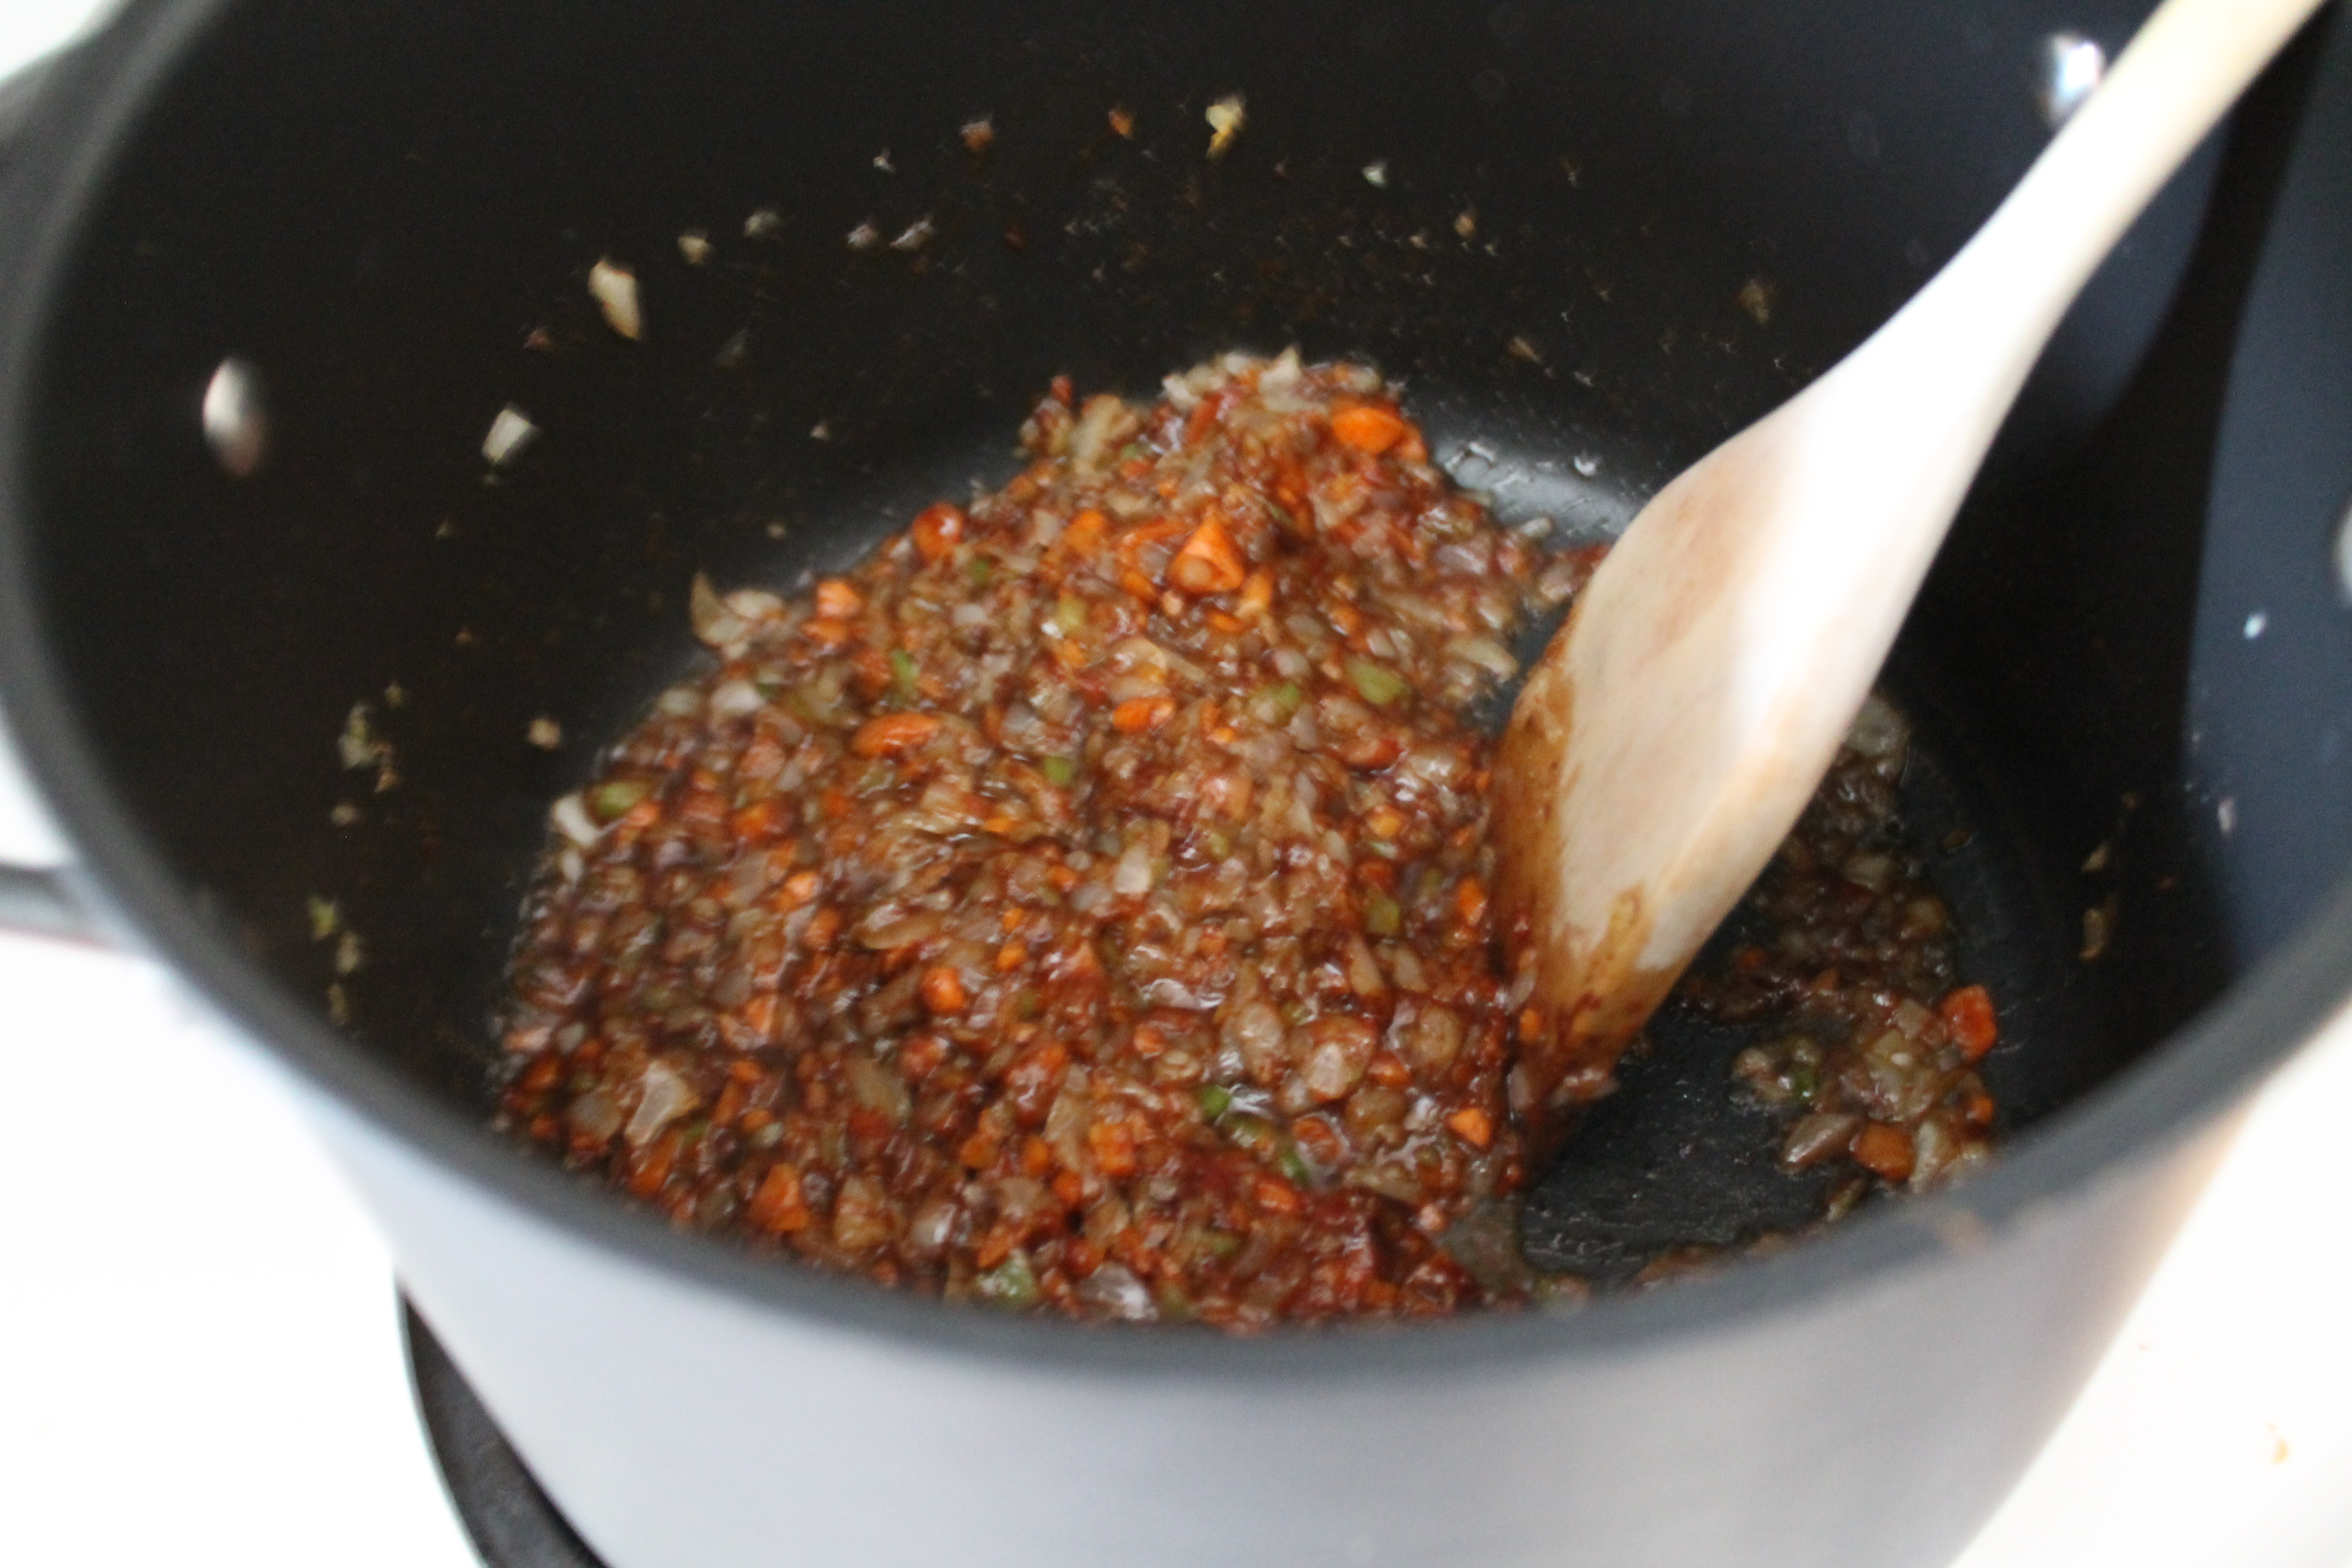 Tomato Paste and Spices